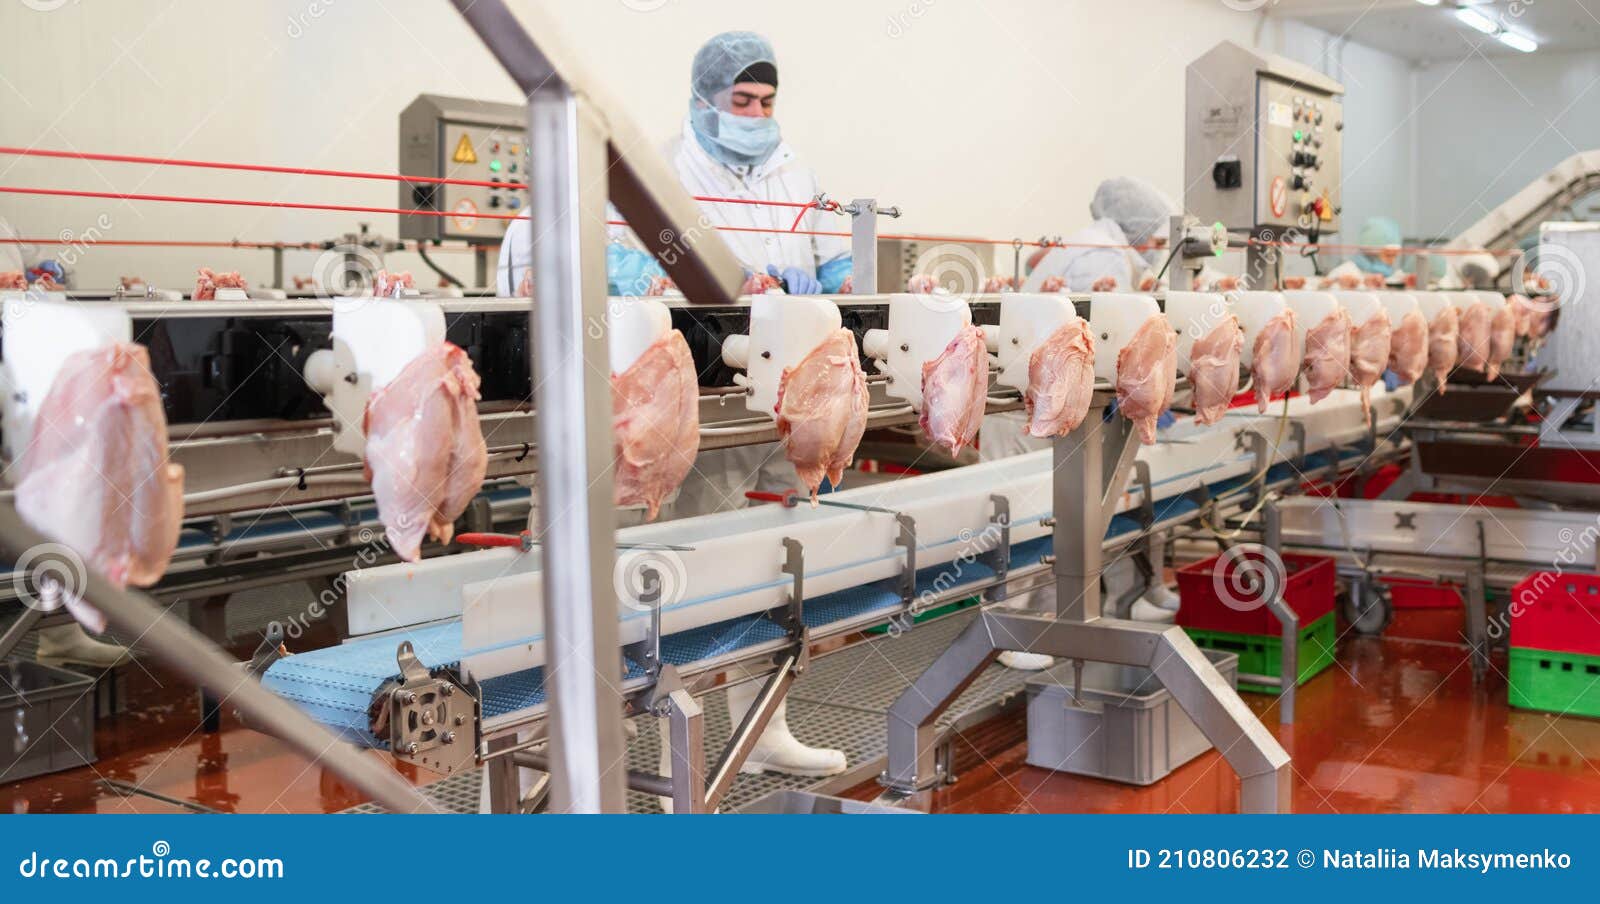 Meat Processing Factory.chicken on a Conveyor Belt.Processing Plant Assembly Line.People Working at a Chicken Photo - Image of business, meat: 210806232